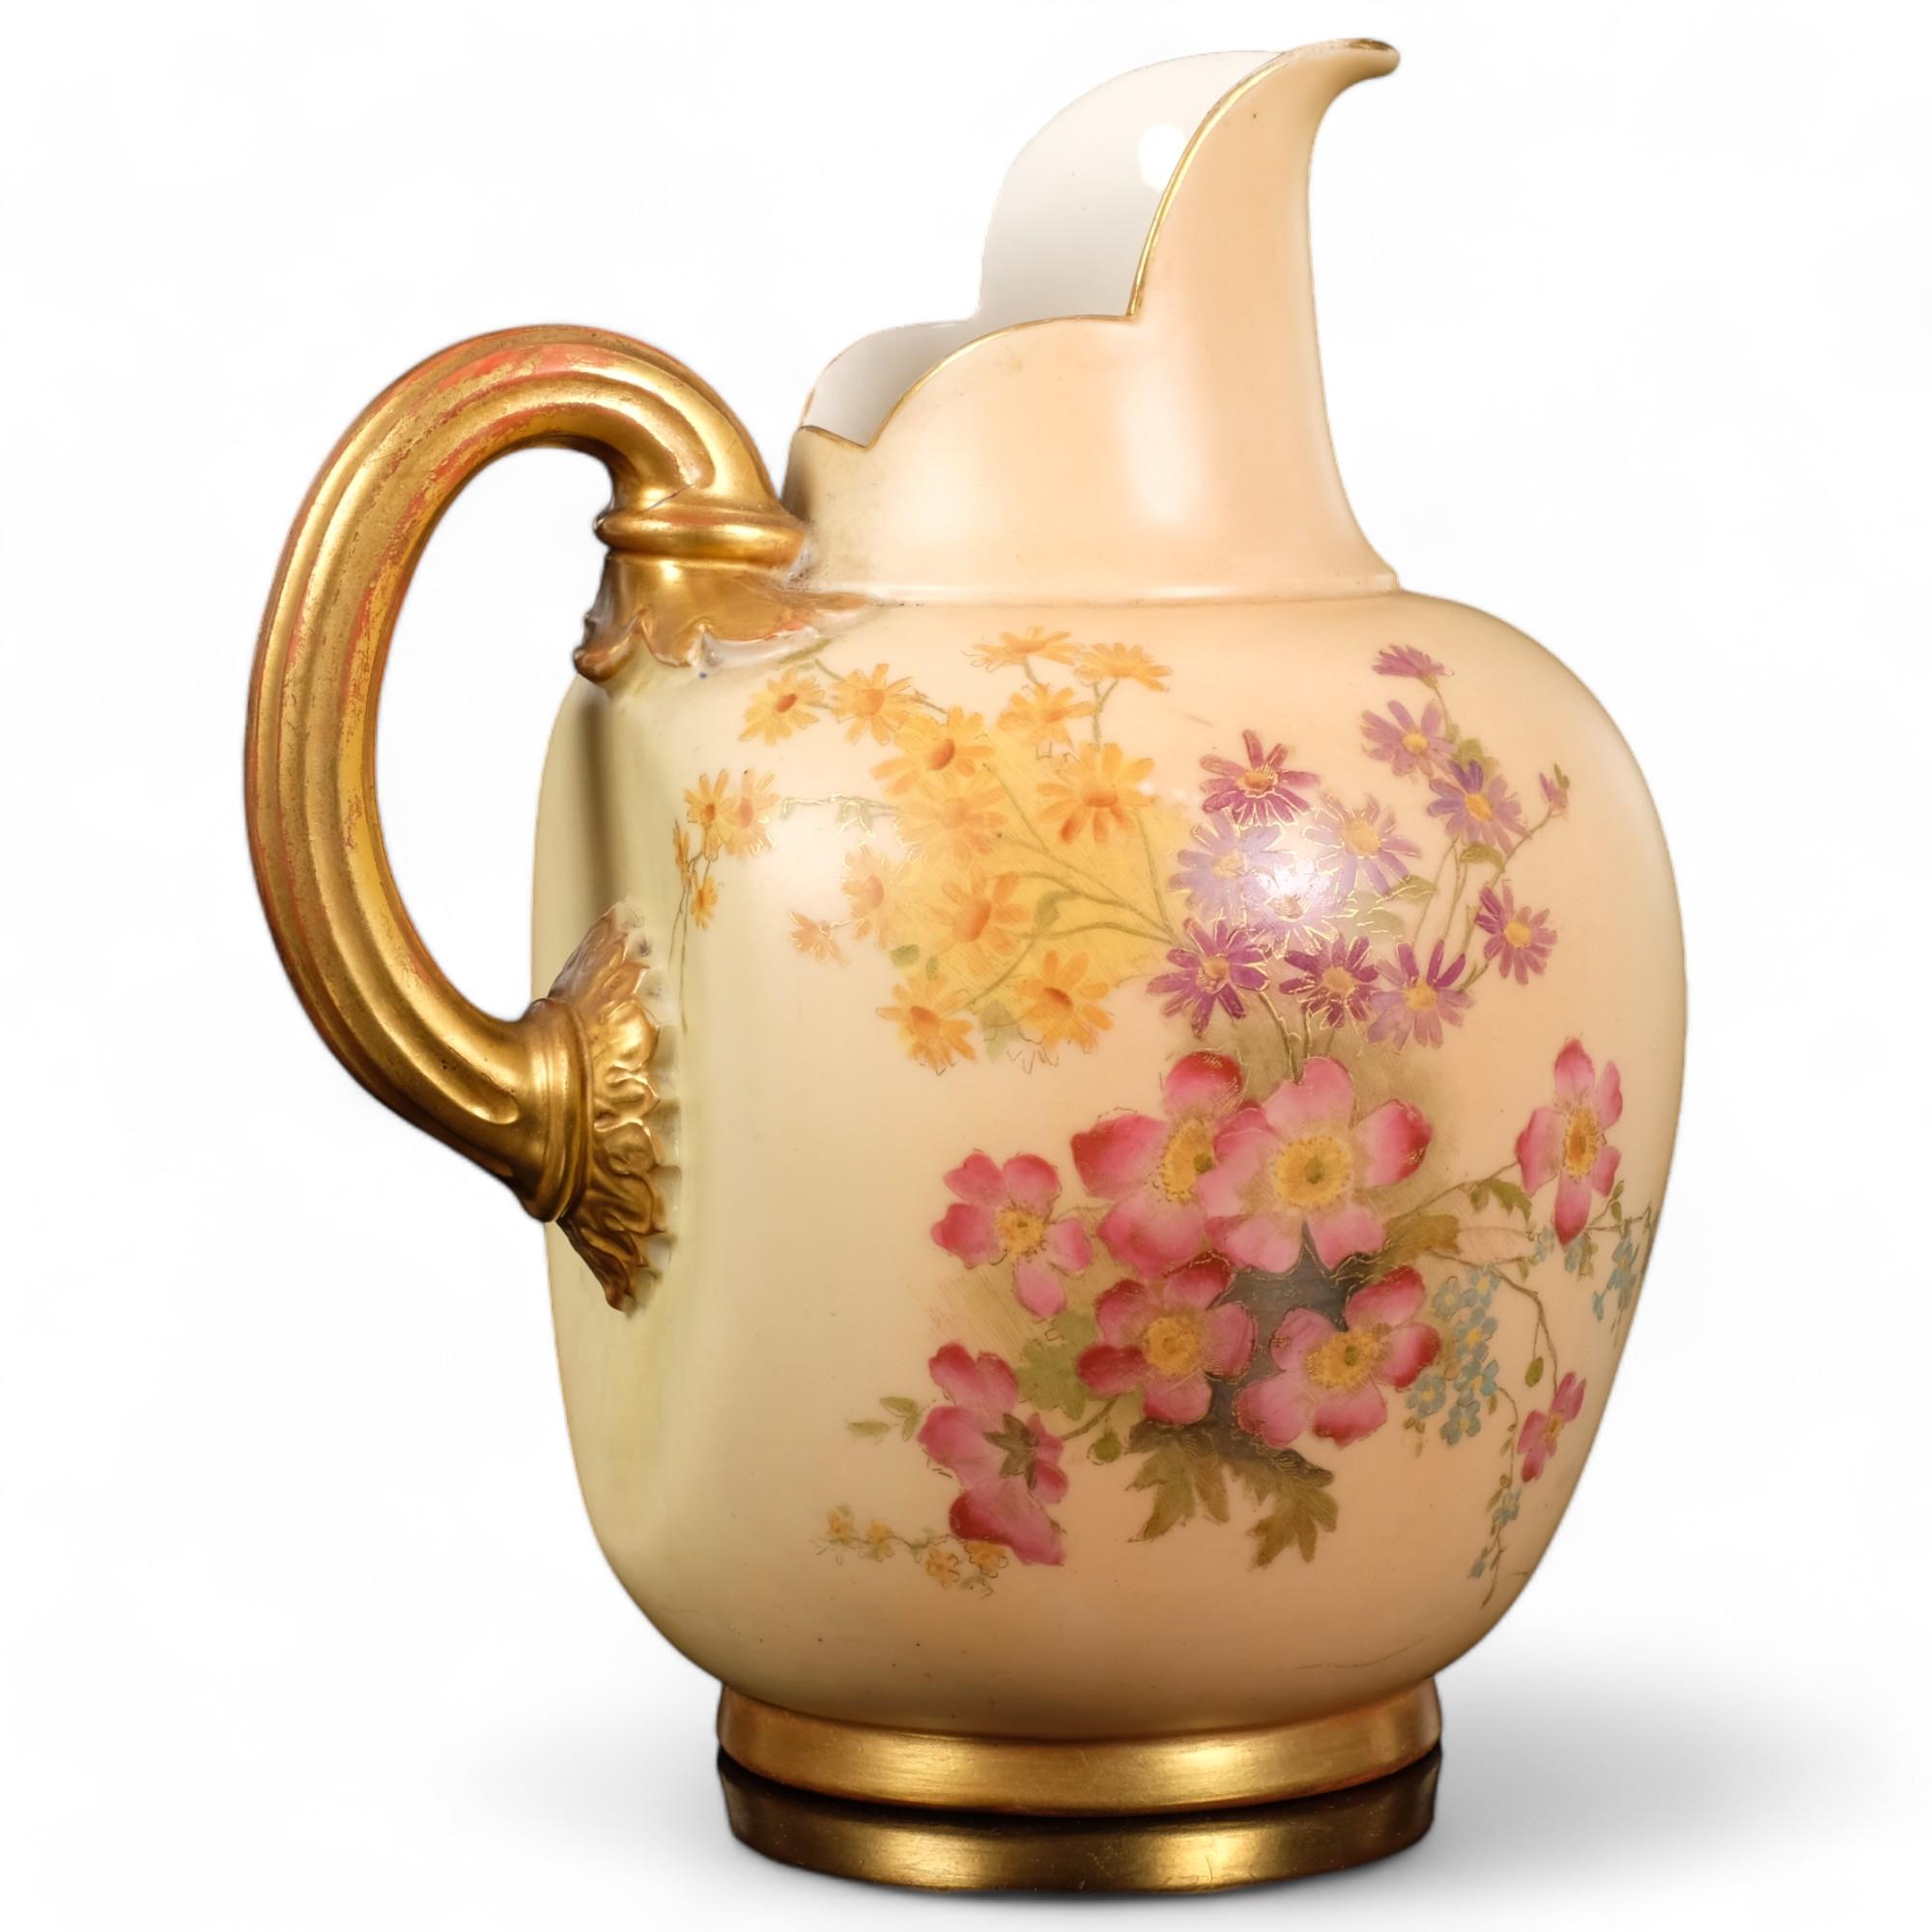 Royal Worcester Blush Ivory flatback jug, with hand painted and gilding decoration, no. 1094, H19.